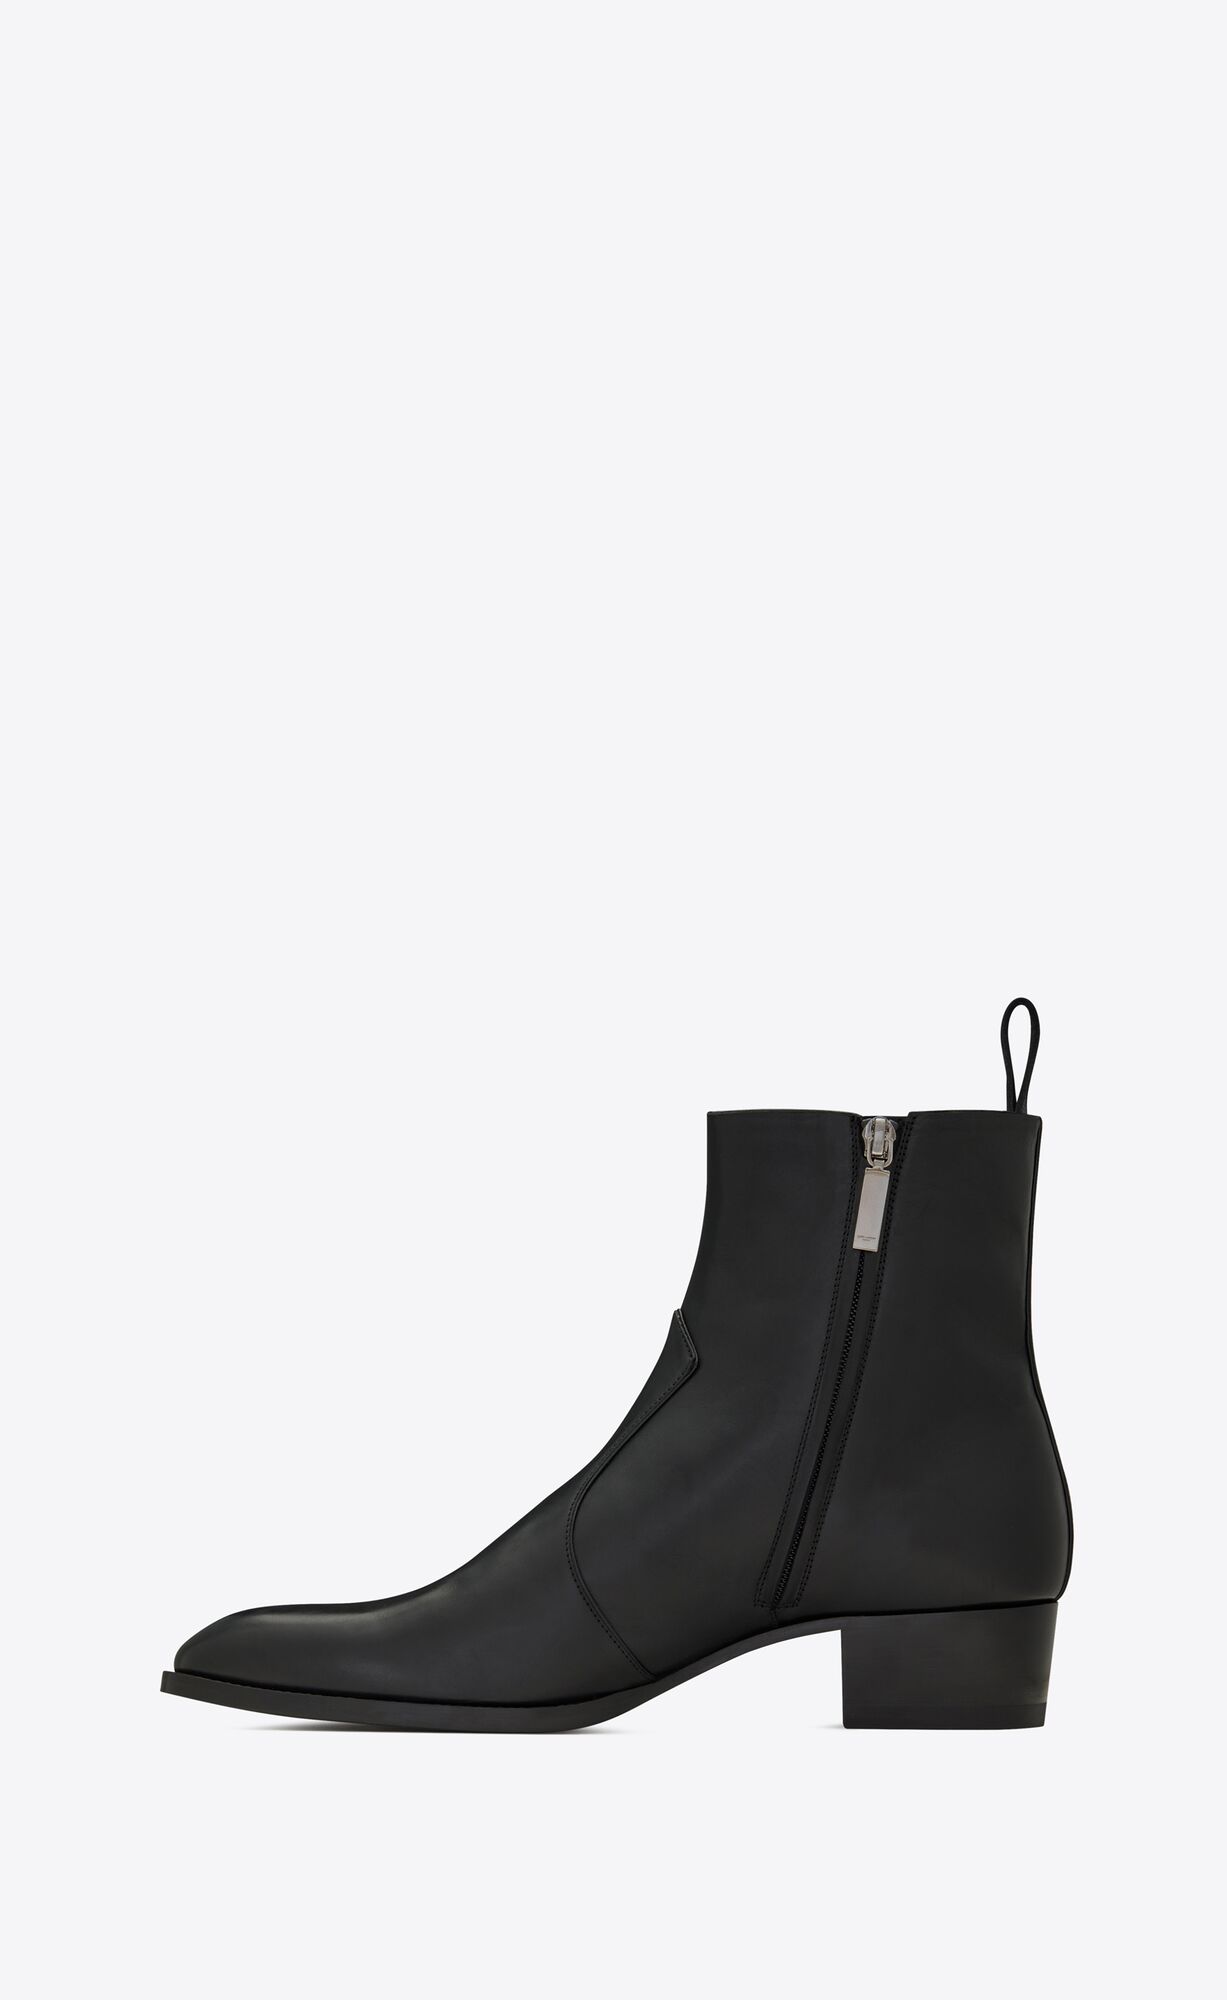 WYATT zipped boots in smooth leather | Saint Laurent United States ...